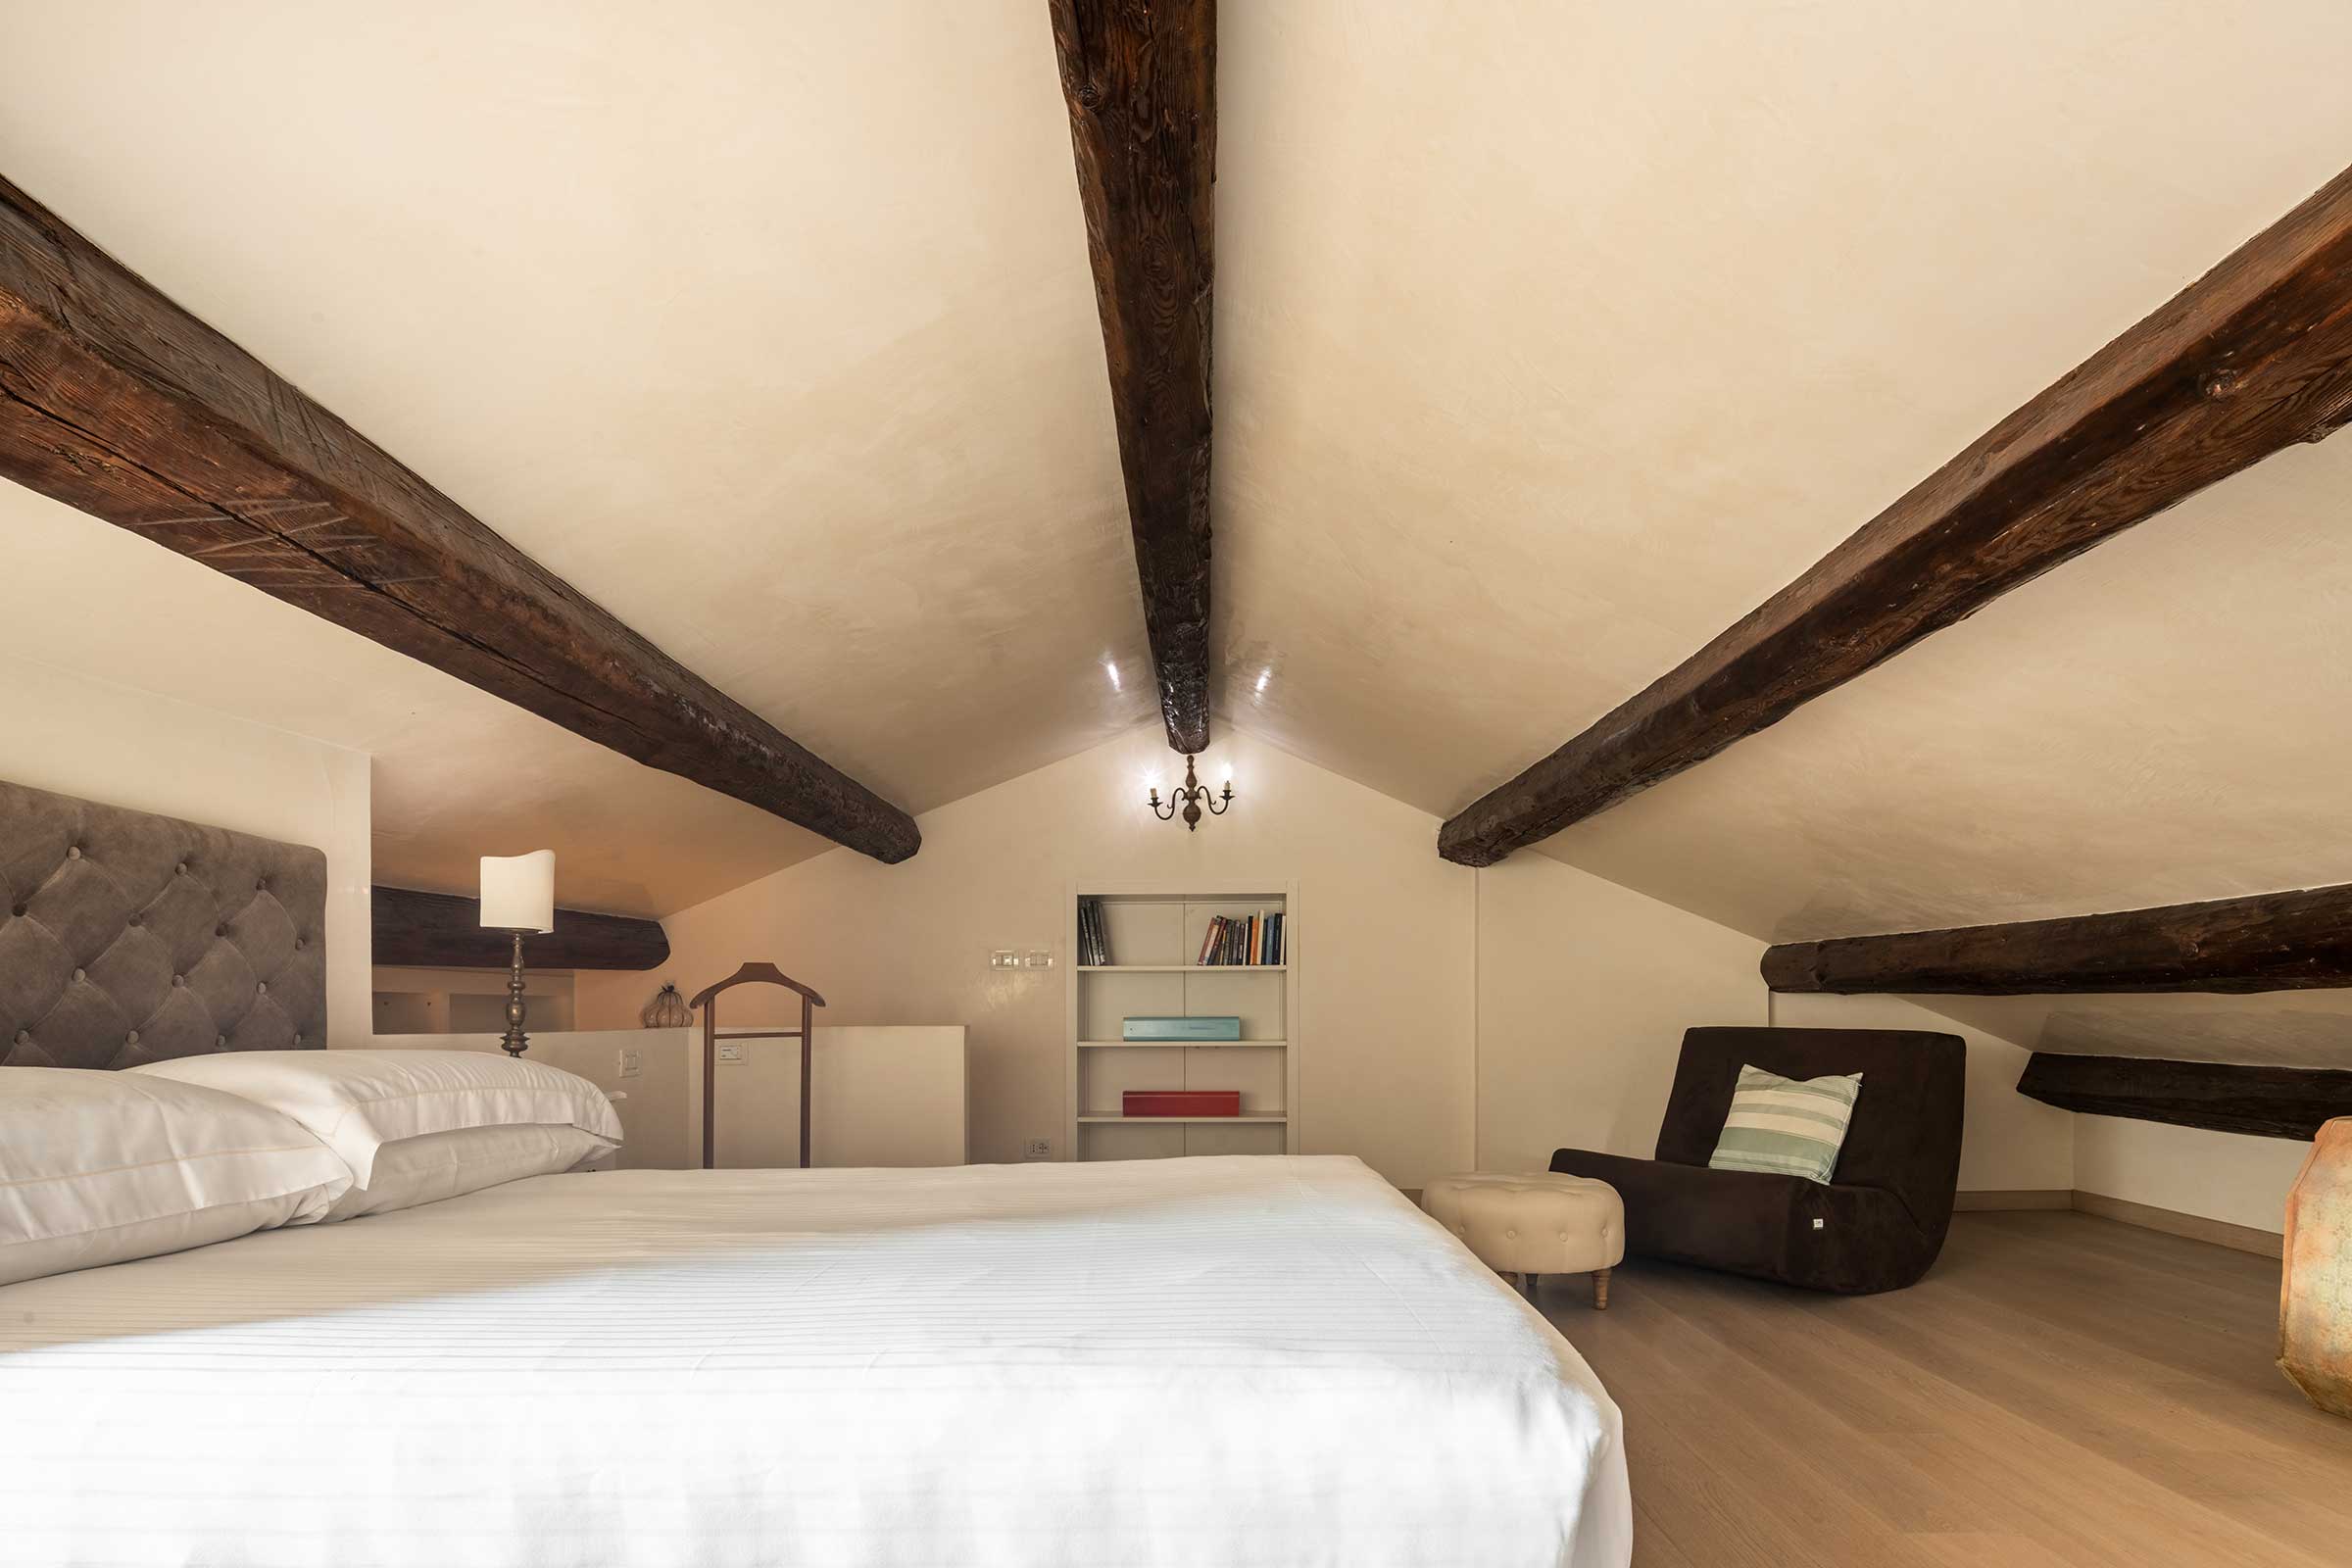 Alighieri "D" attic room with double bed and rooftop view